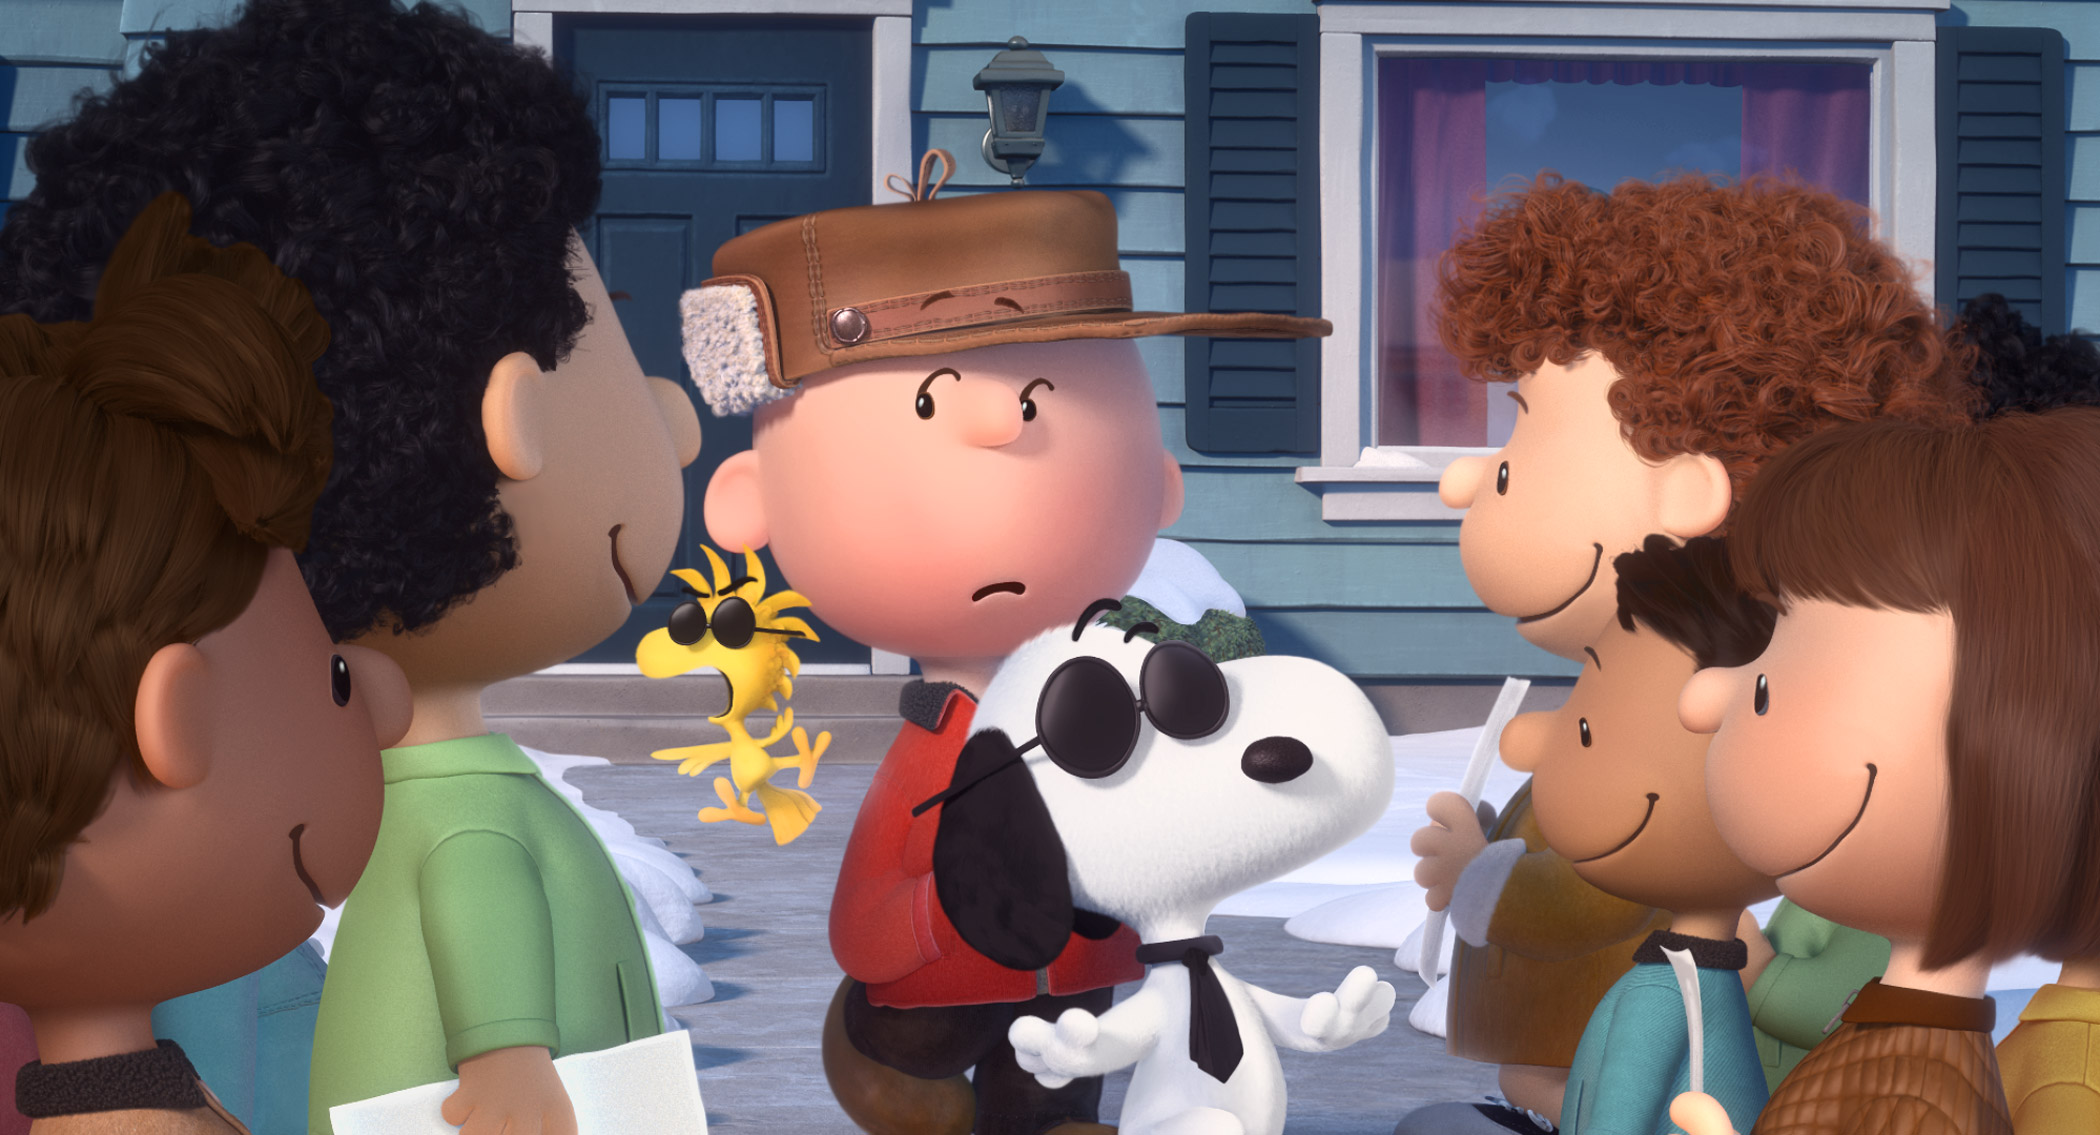 Charlie Brown, Snoopy and Woodstock in the peanuts movie